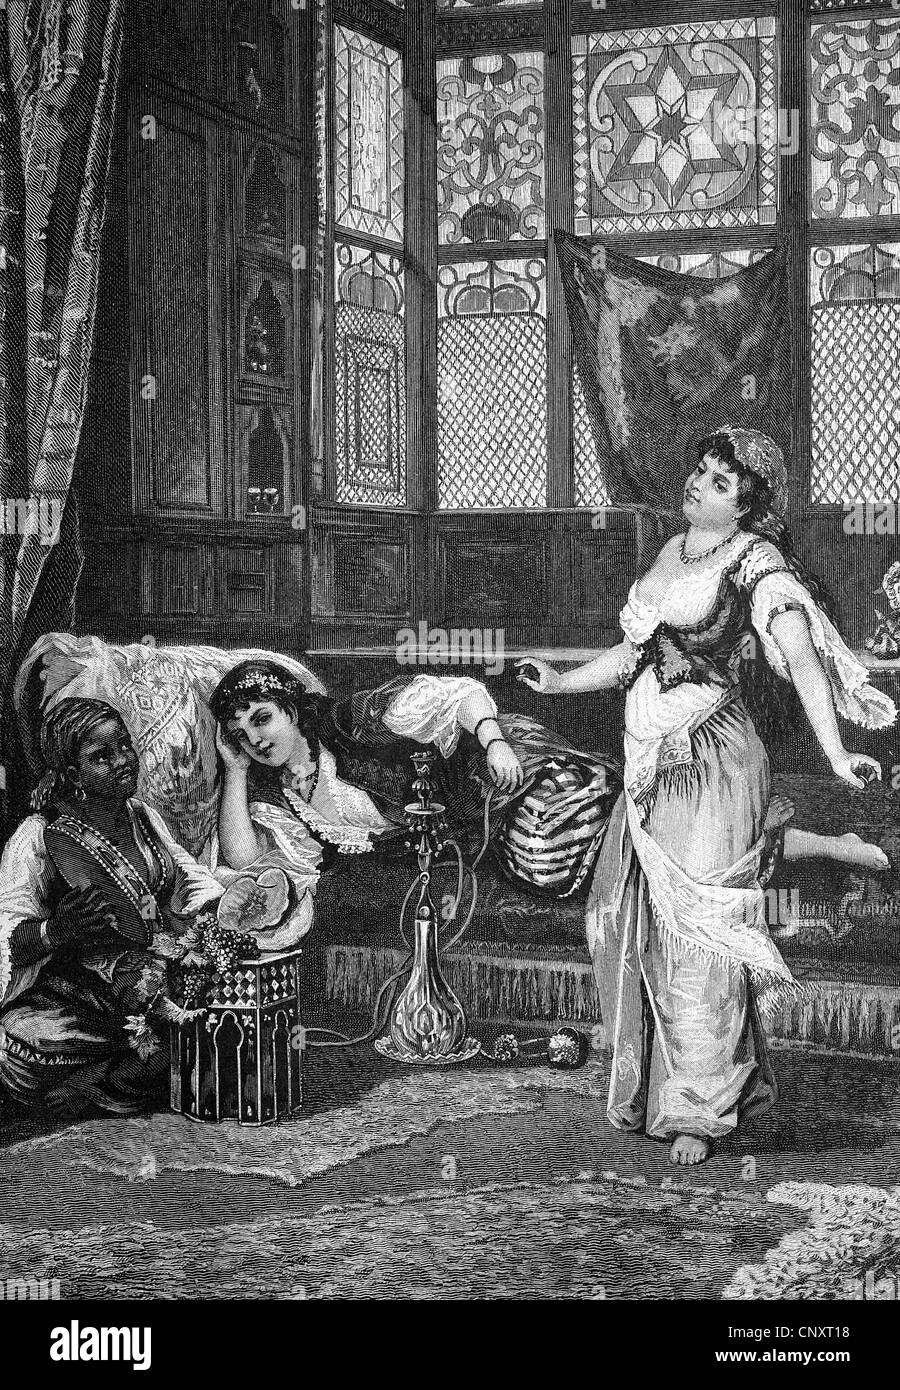 In a harem in Arabia, historical engraving, 1888 Stock Photo